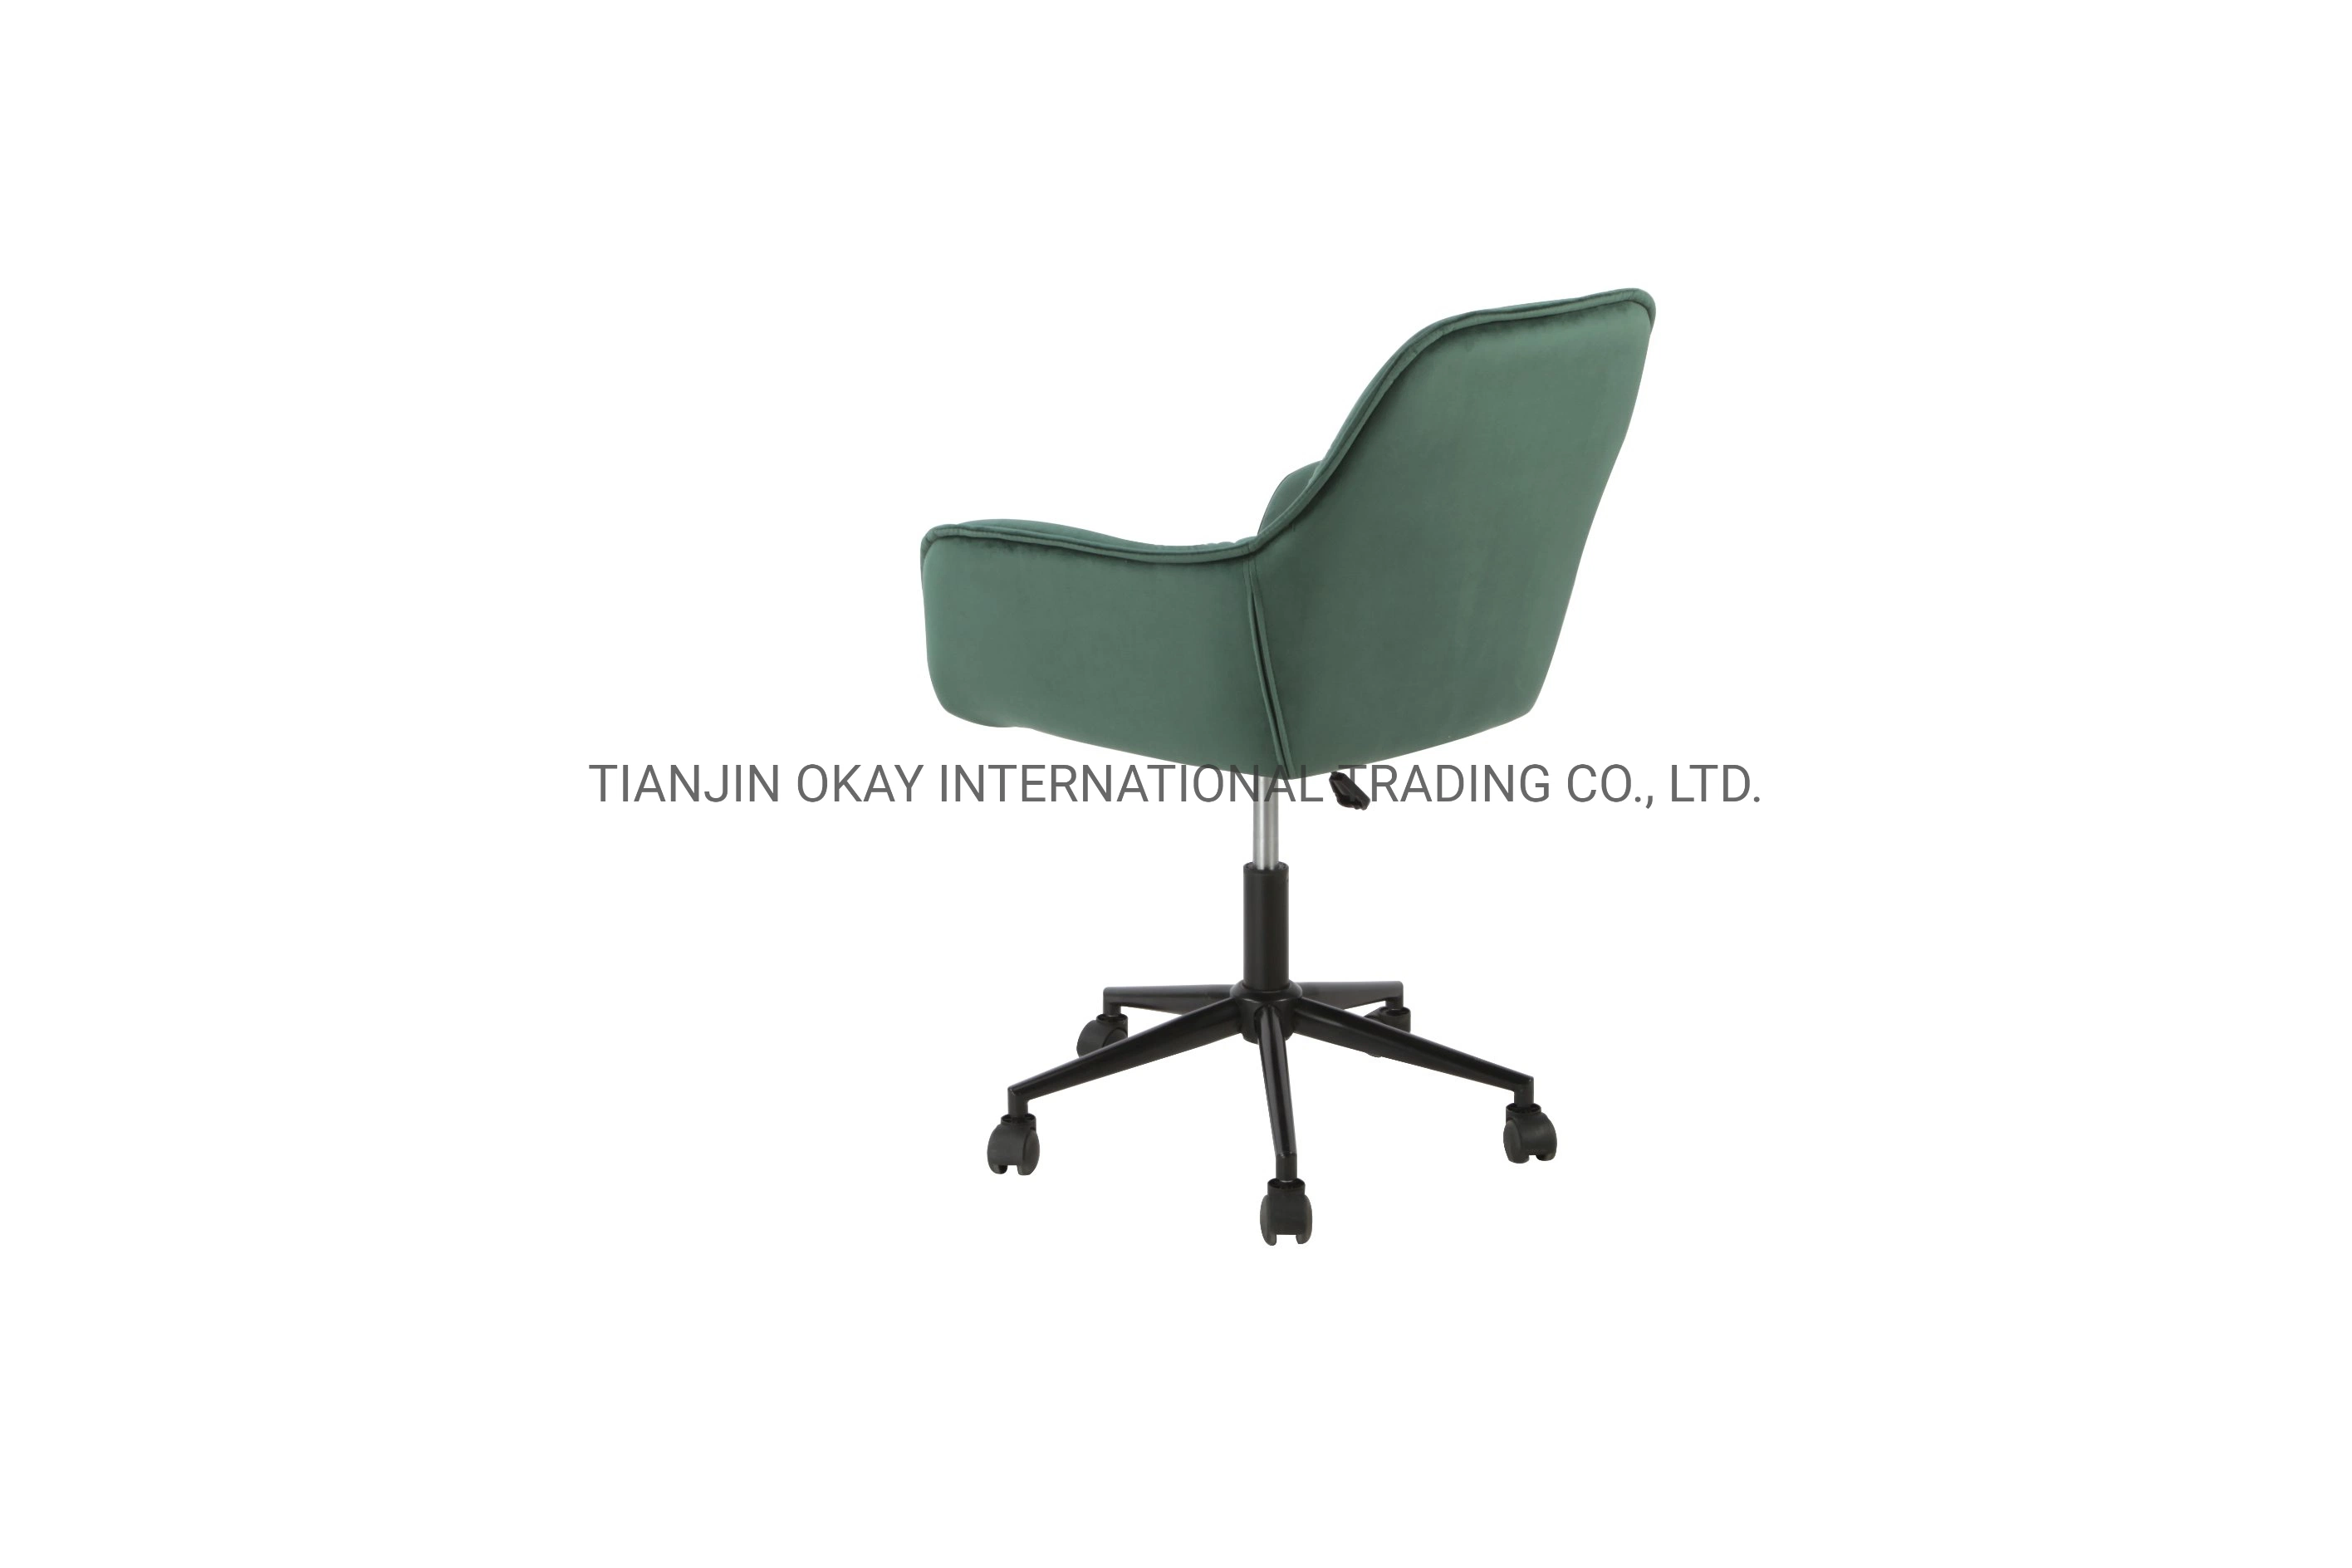 Modern Velvet Cover with Armrest Swivel Desk Home Office Task Chair with Casters Home Office Chair